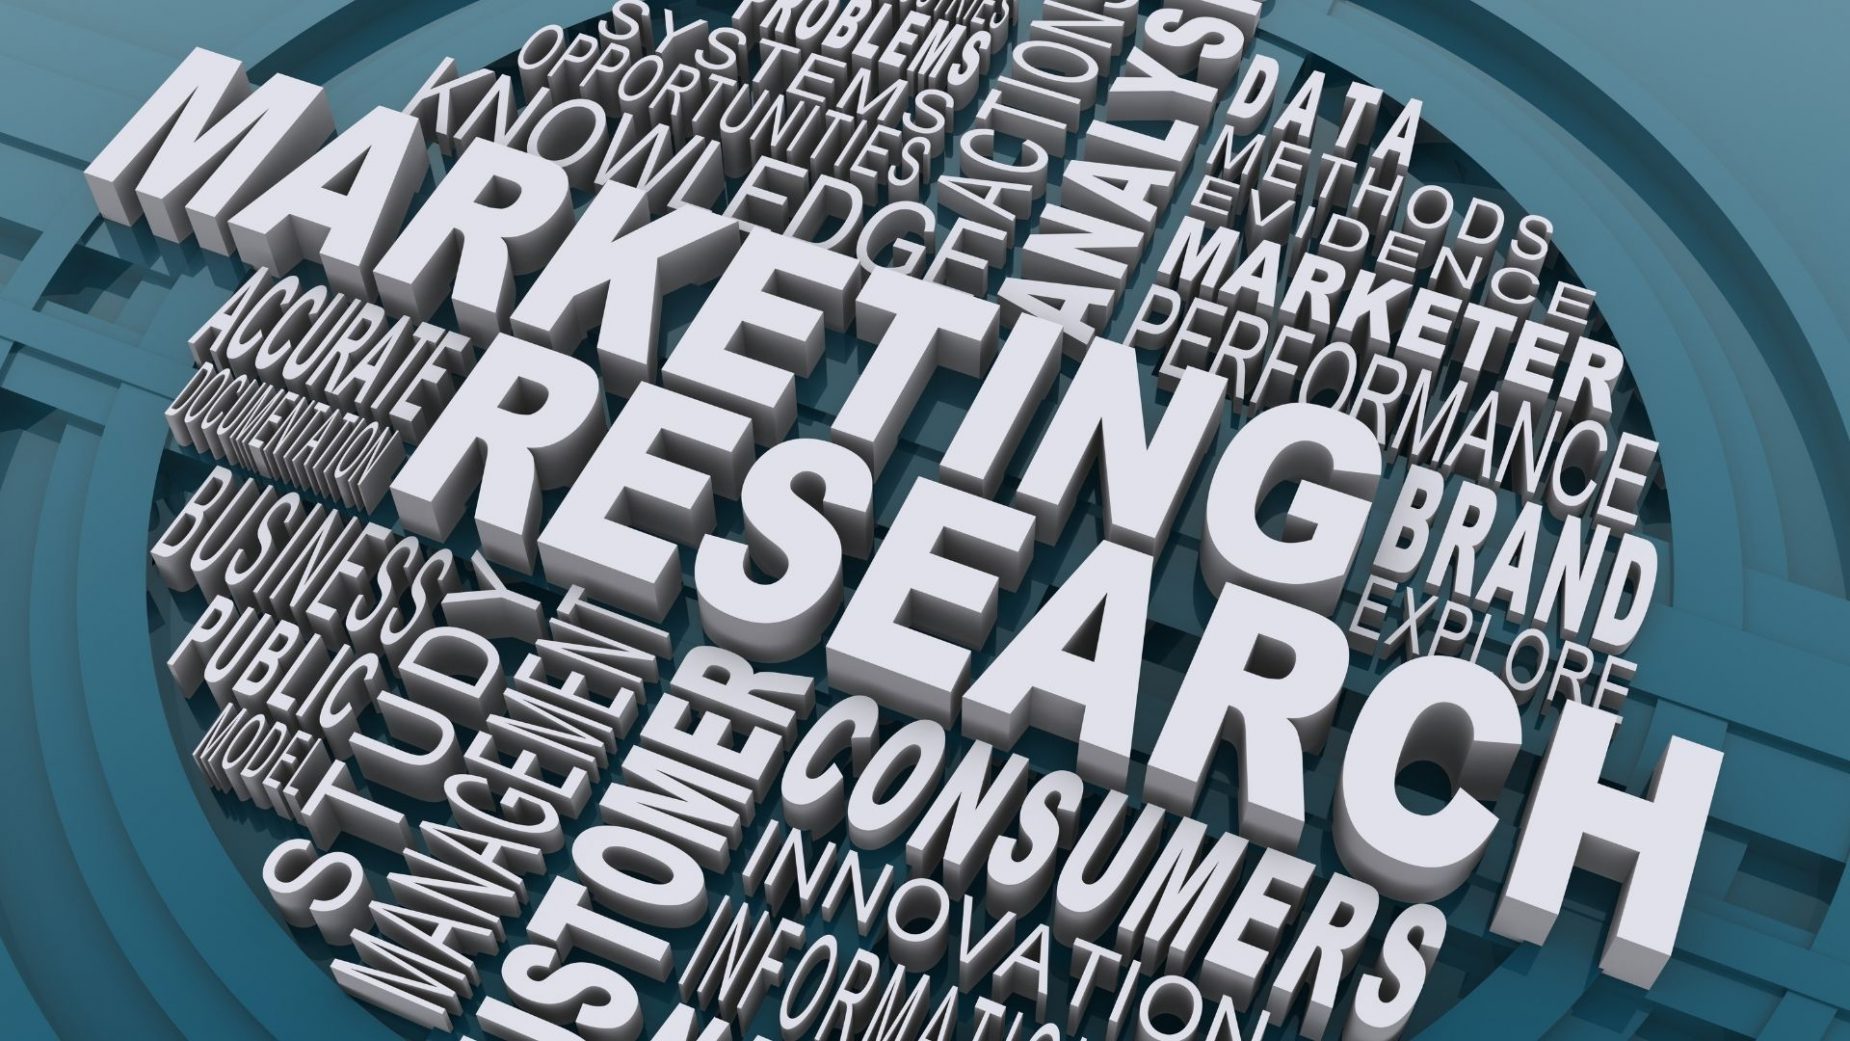 Global Marketing Research And Analysis Services Market Outlook, Opportunities And Strategies